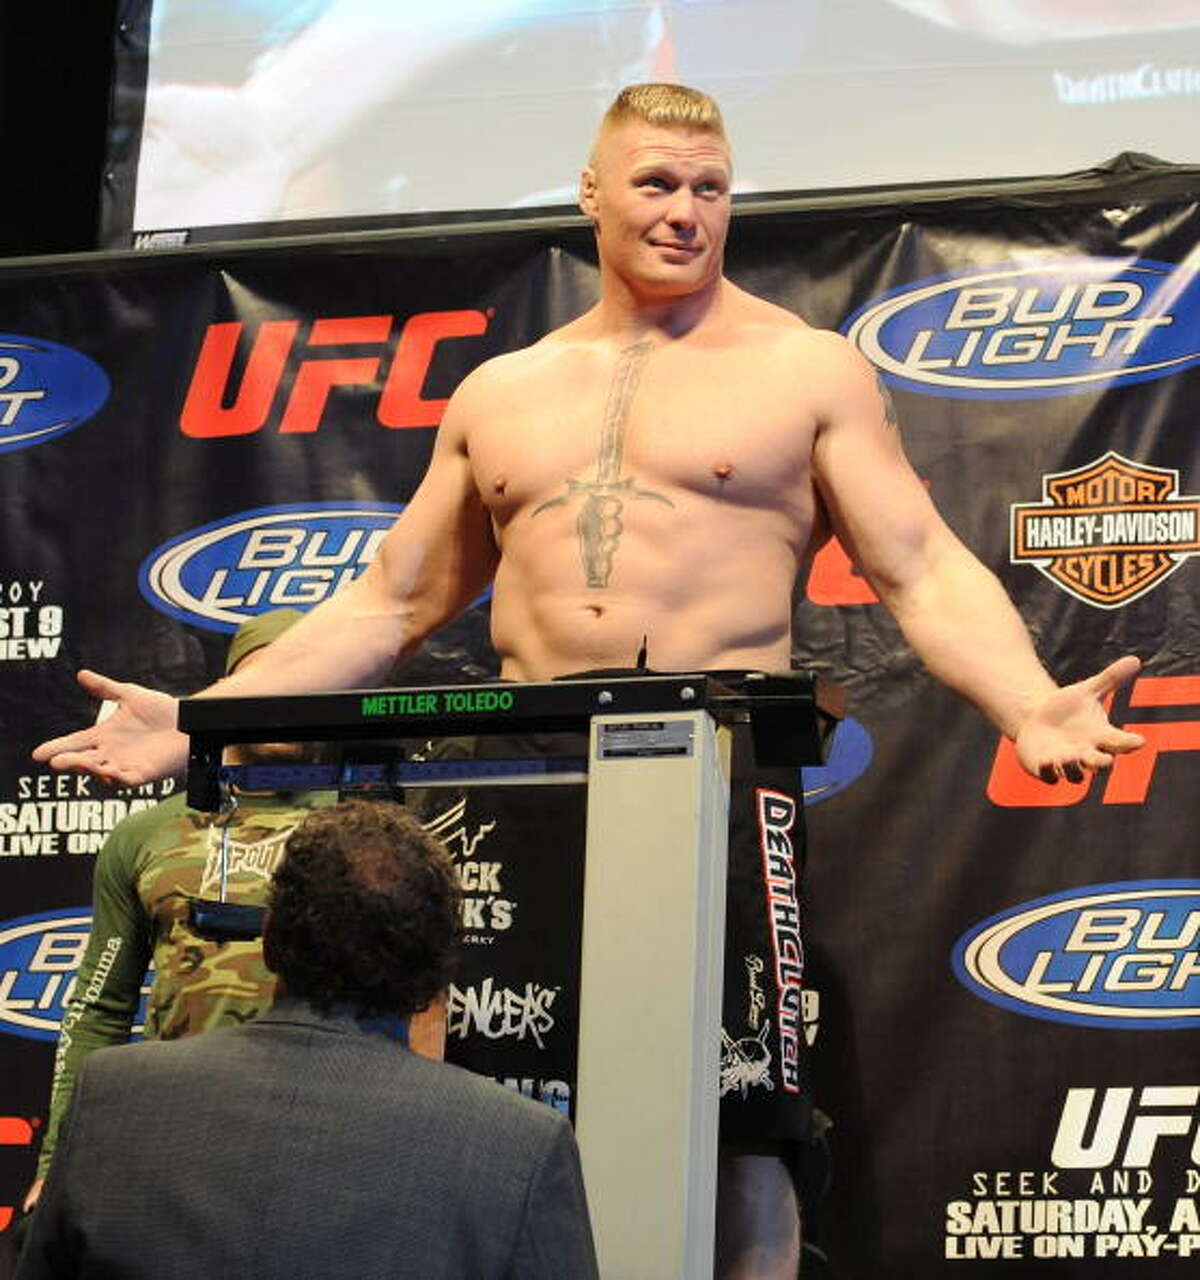 Brock Lesnar was charged with possession of steroids in 2001.